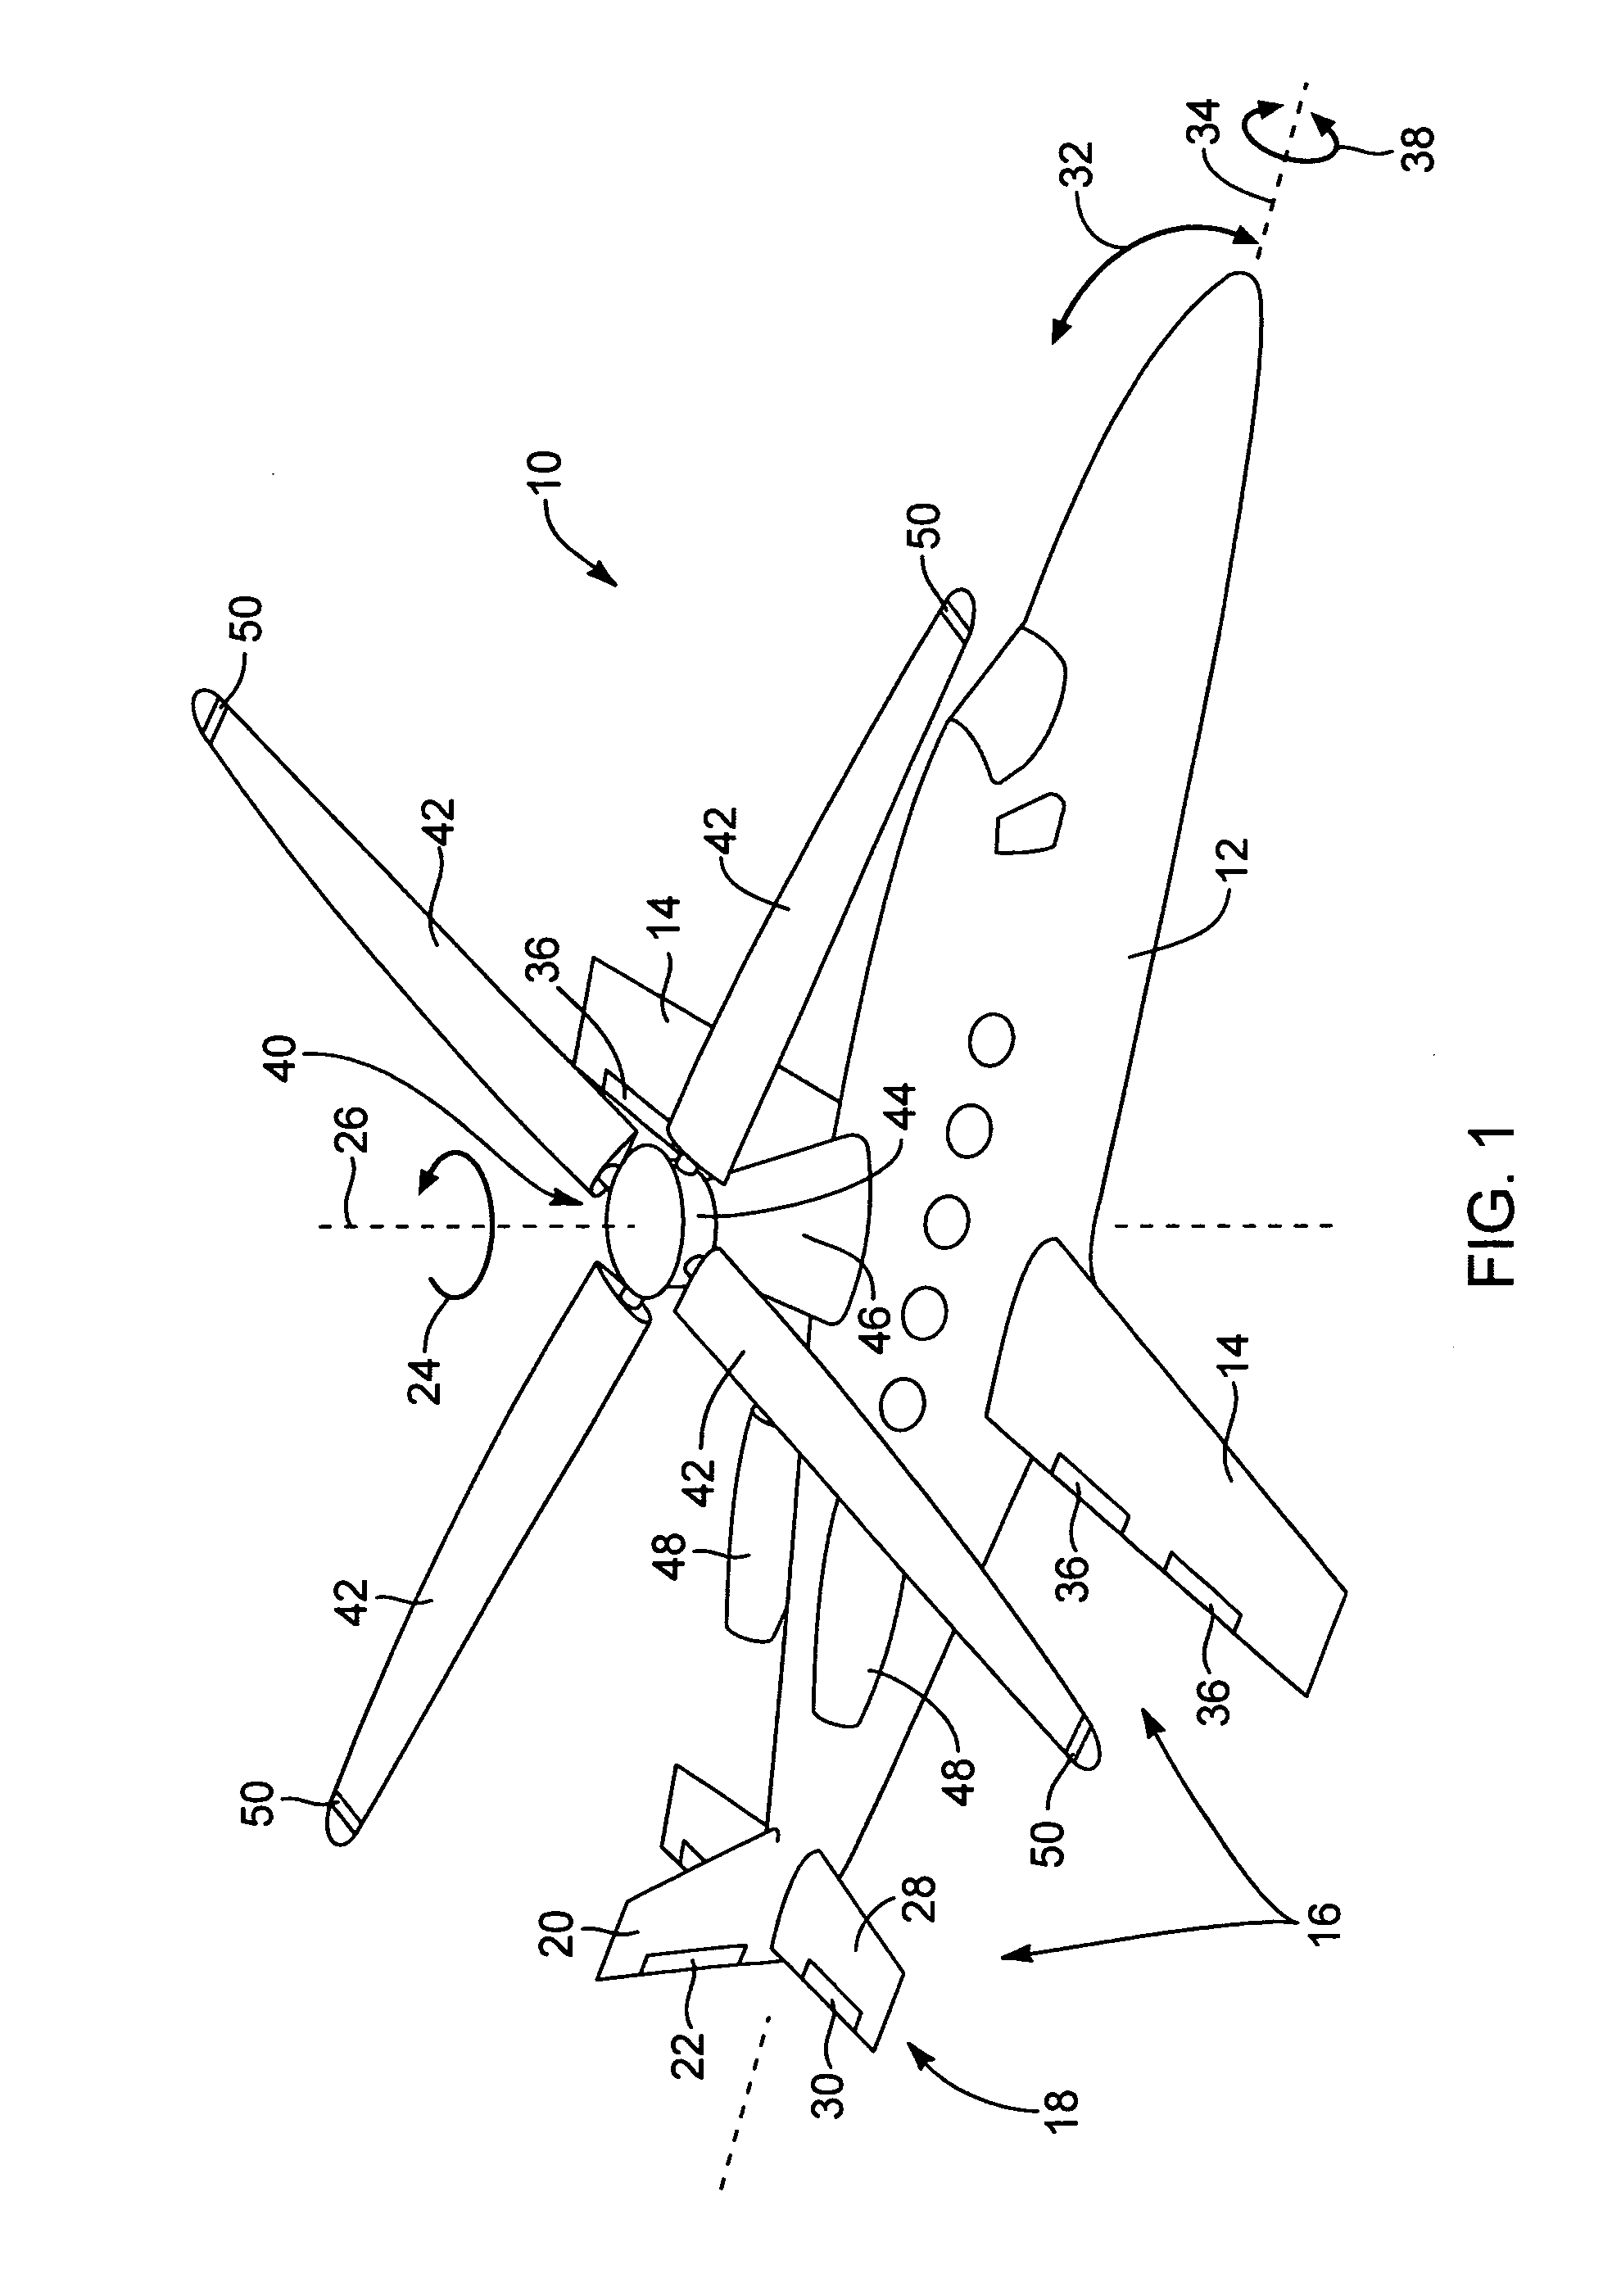 Rotor-mast-tilting apparatus and method for optimized crossing of natural frequencies